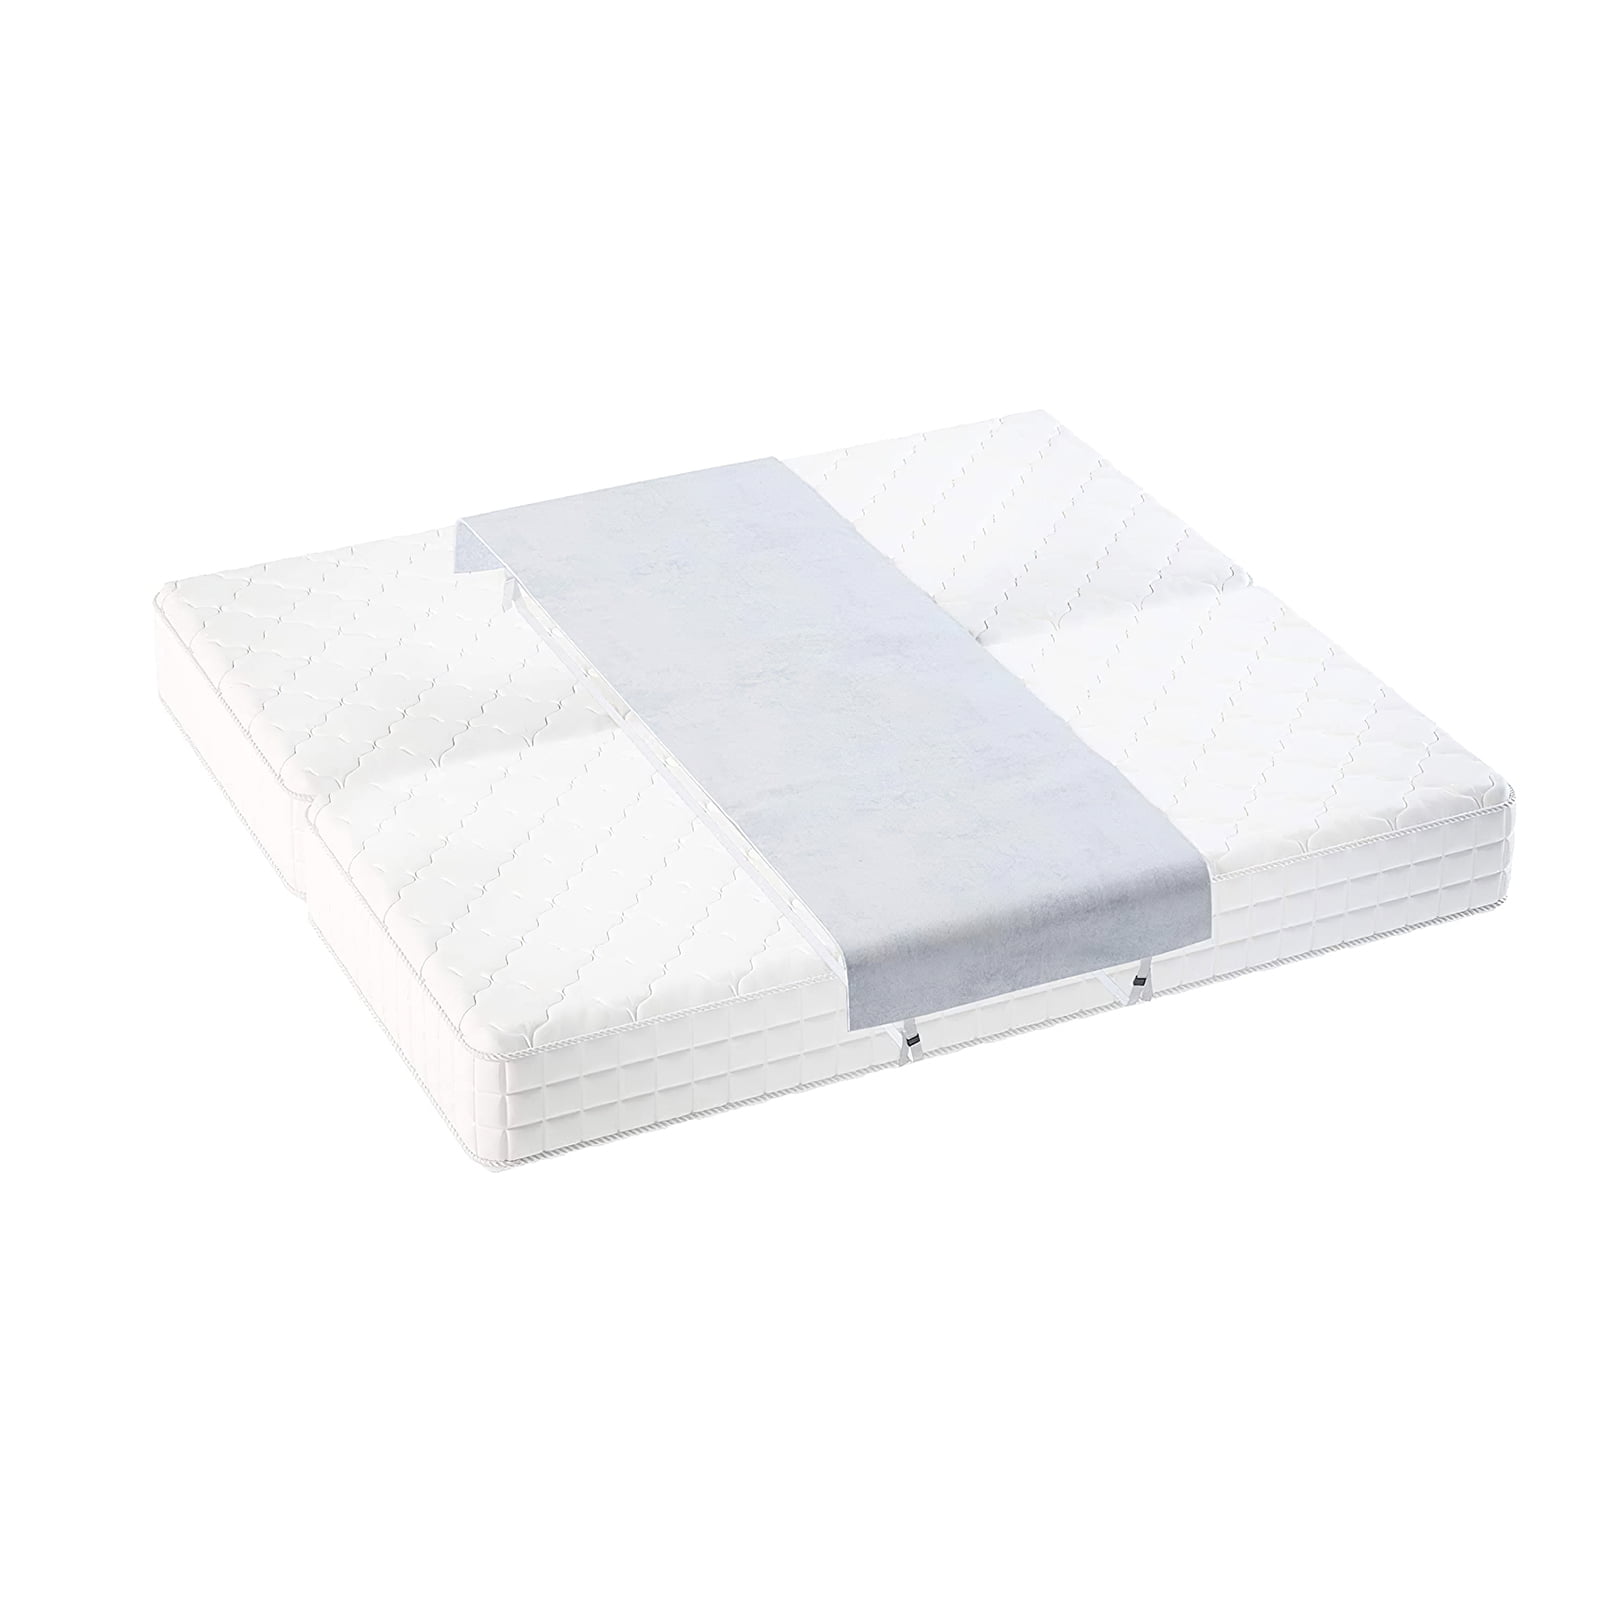 Bedbinders ~ Twin Bed Connector & Mattres gap filler to create your personal King Bed Reduce the gap in the middle using this Bed Bridge. Stop sliding mattresses with this Mattress Connector